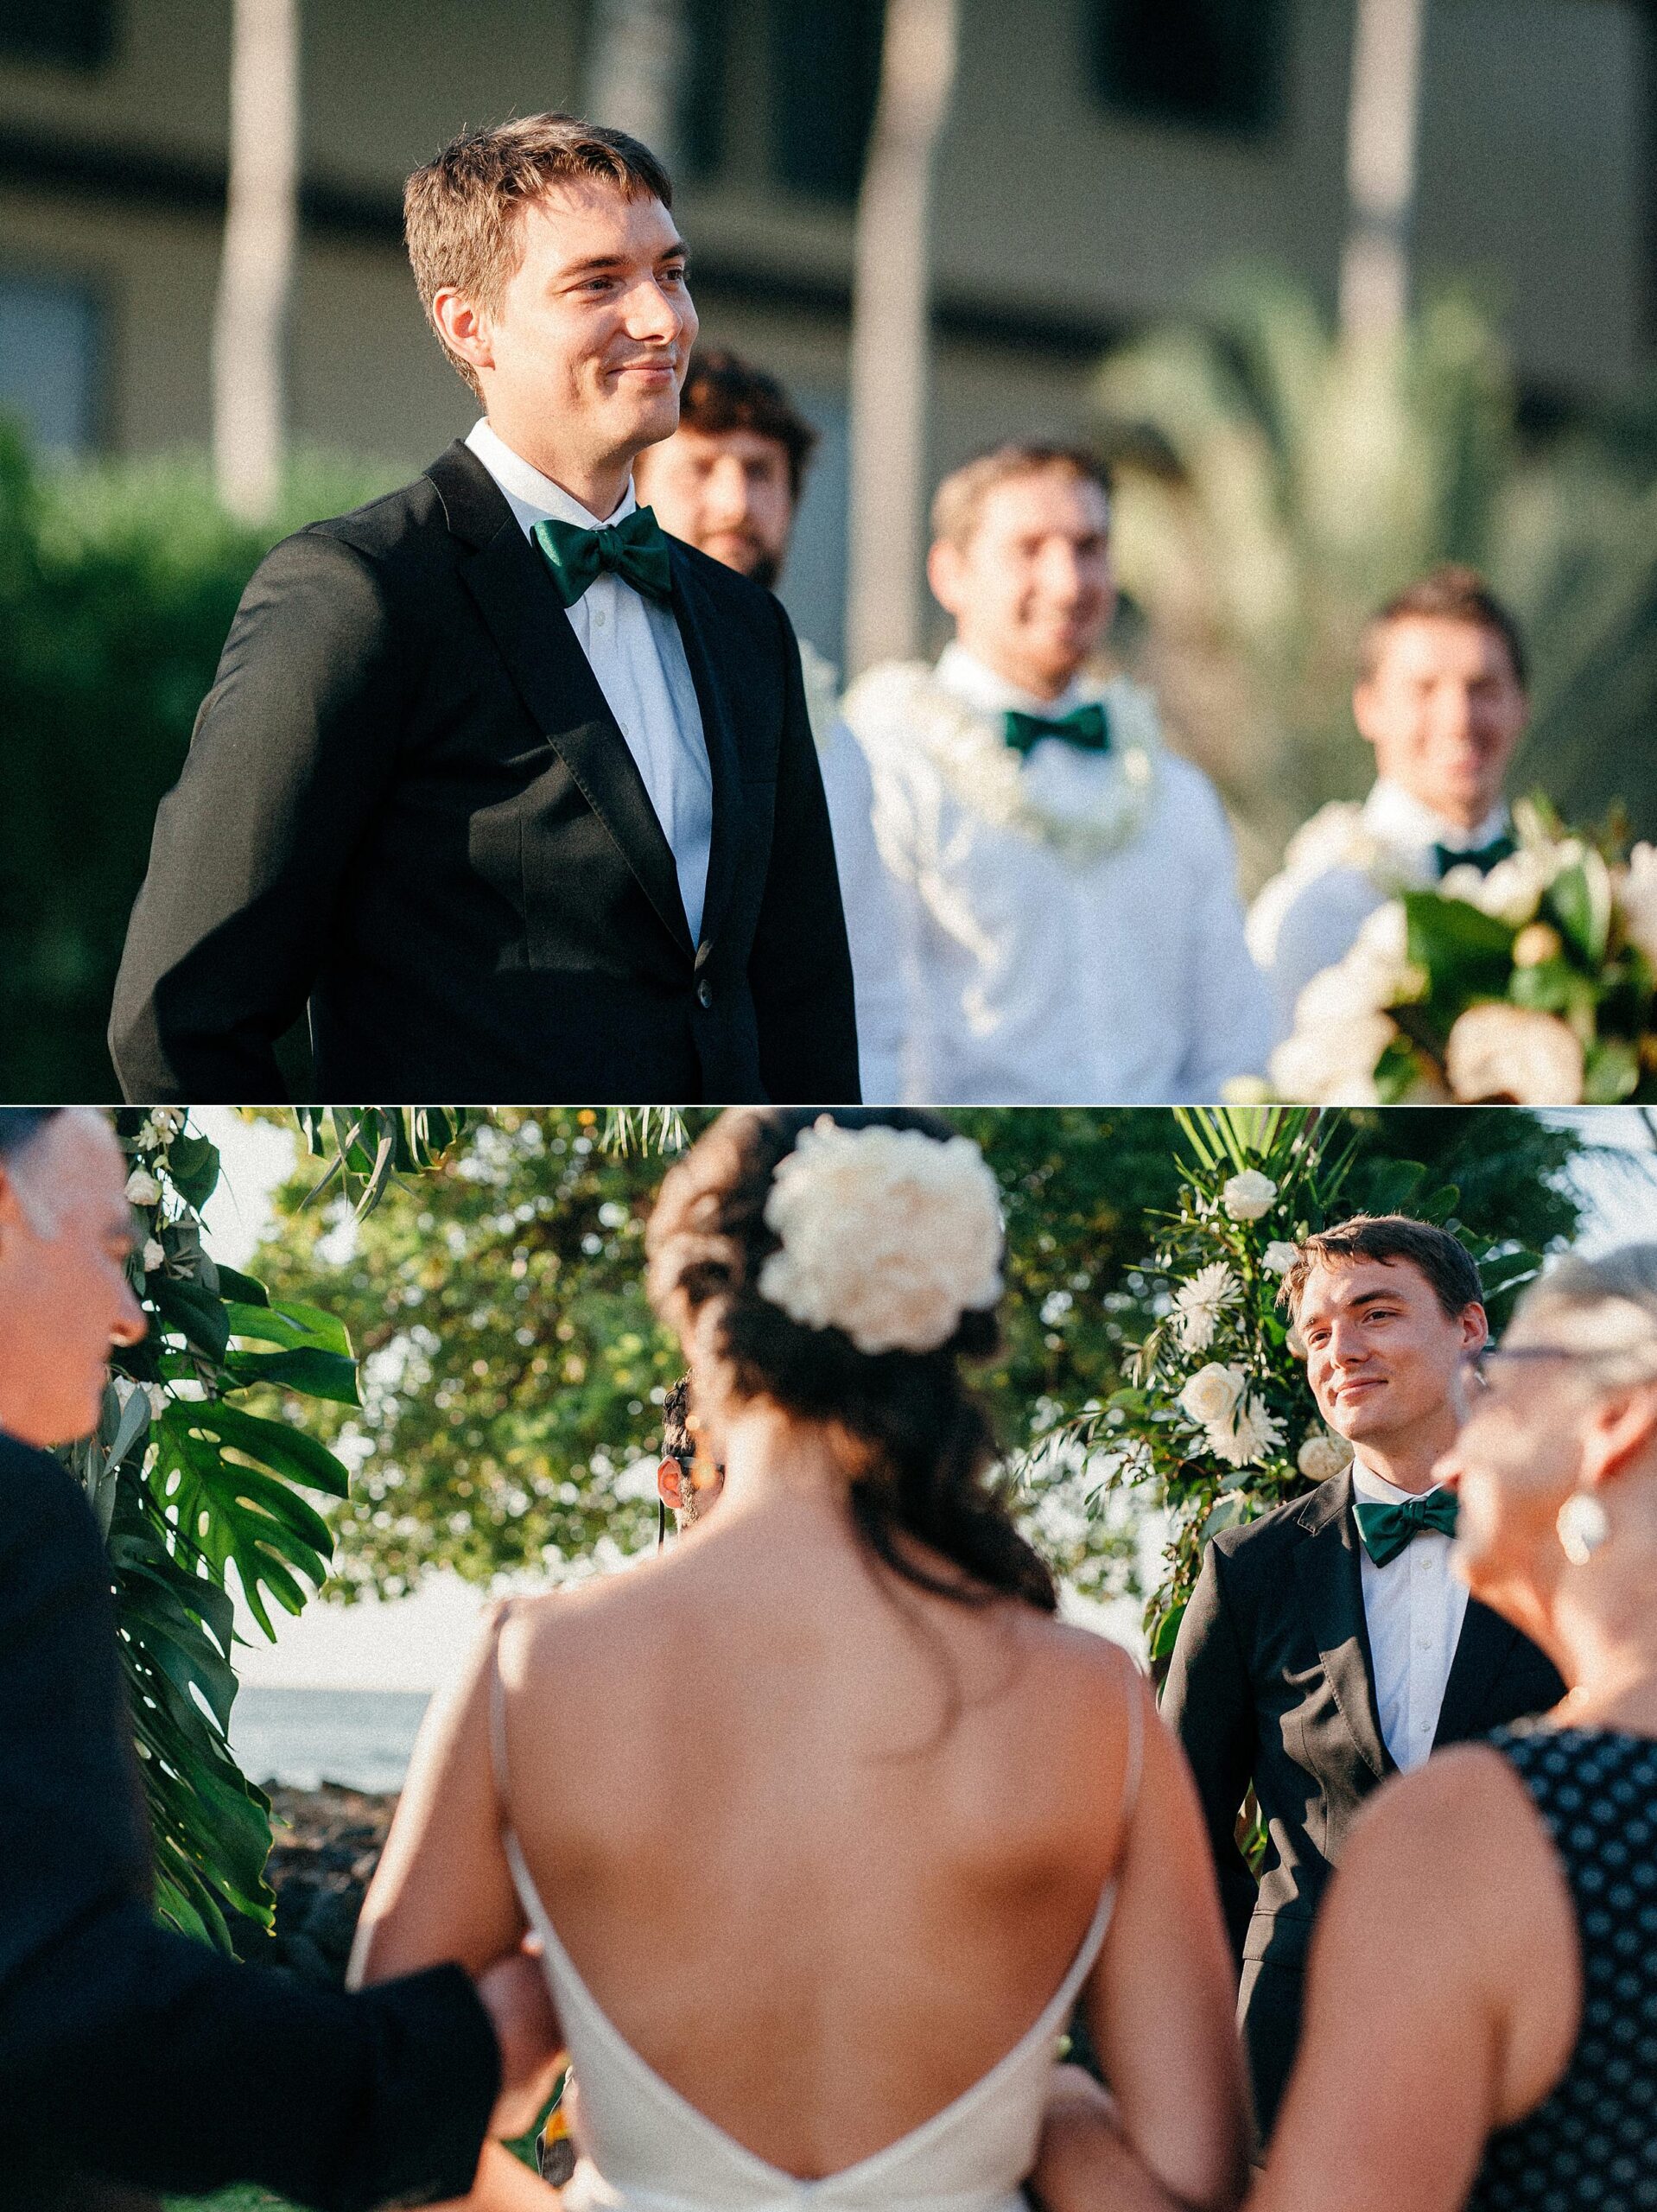 Kona-Big-Island-Hawaii-New-Years-Eve-Wedding-with-Ceremony-at-Living-Stones-Church-and-Reception-at-Daylight-Mind-Coffee_0012.jpg